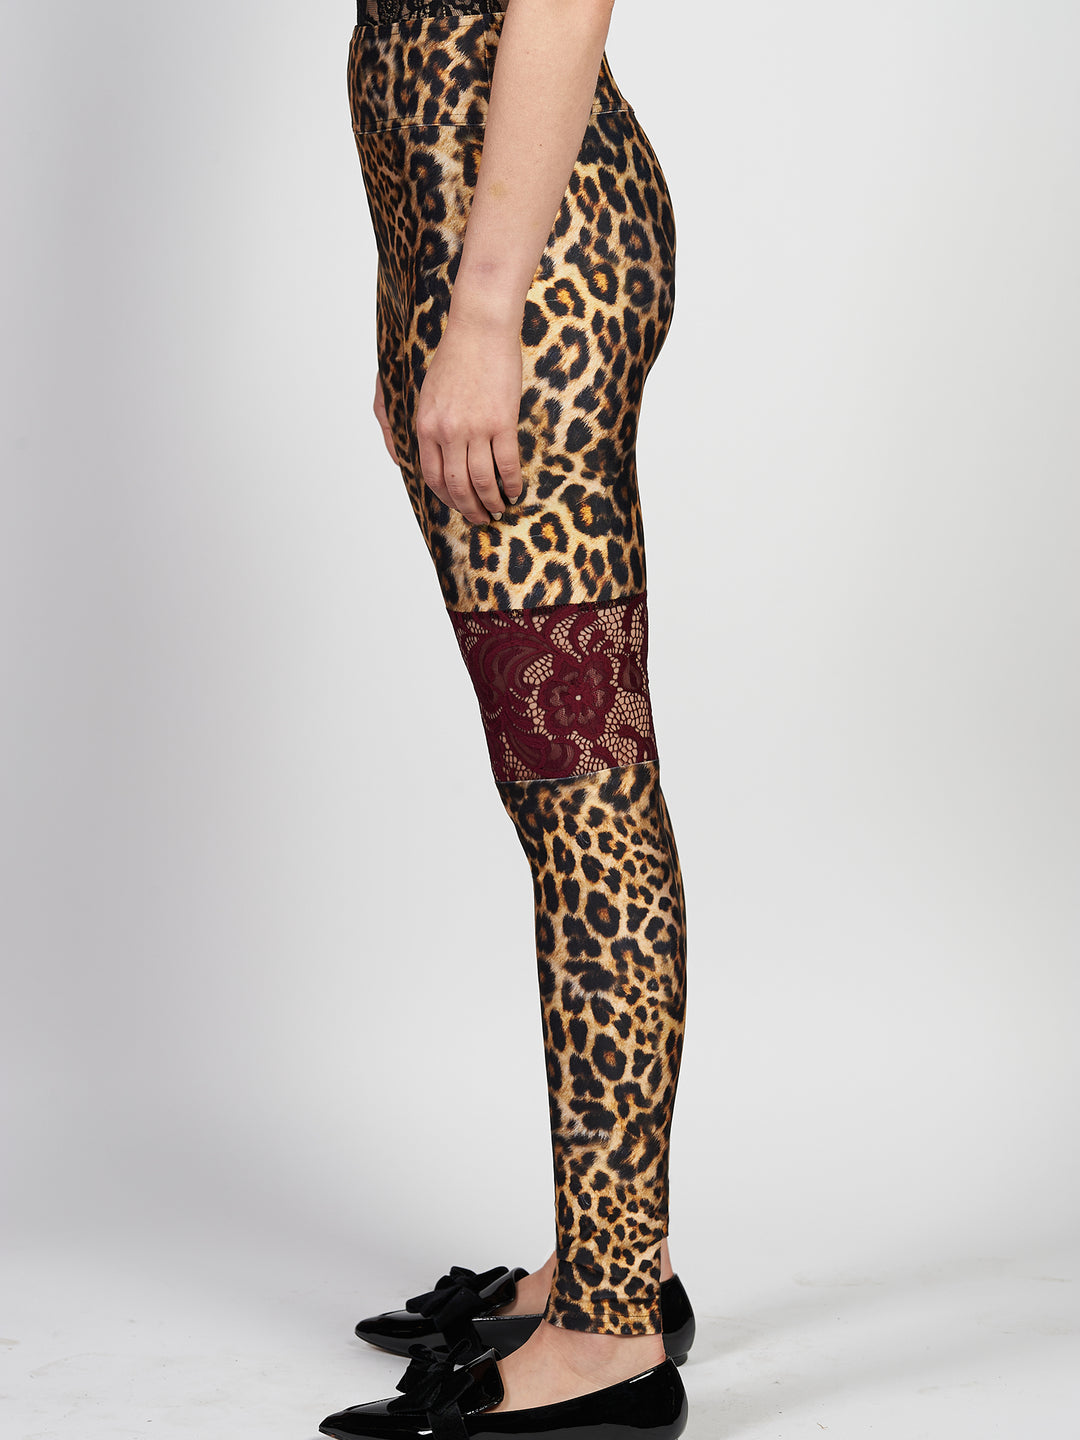 NKD Smooth Tech White Leopard Leggings Size 24 - $42 - From Amy